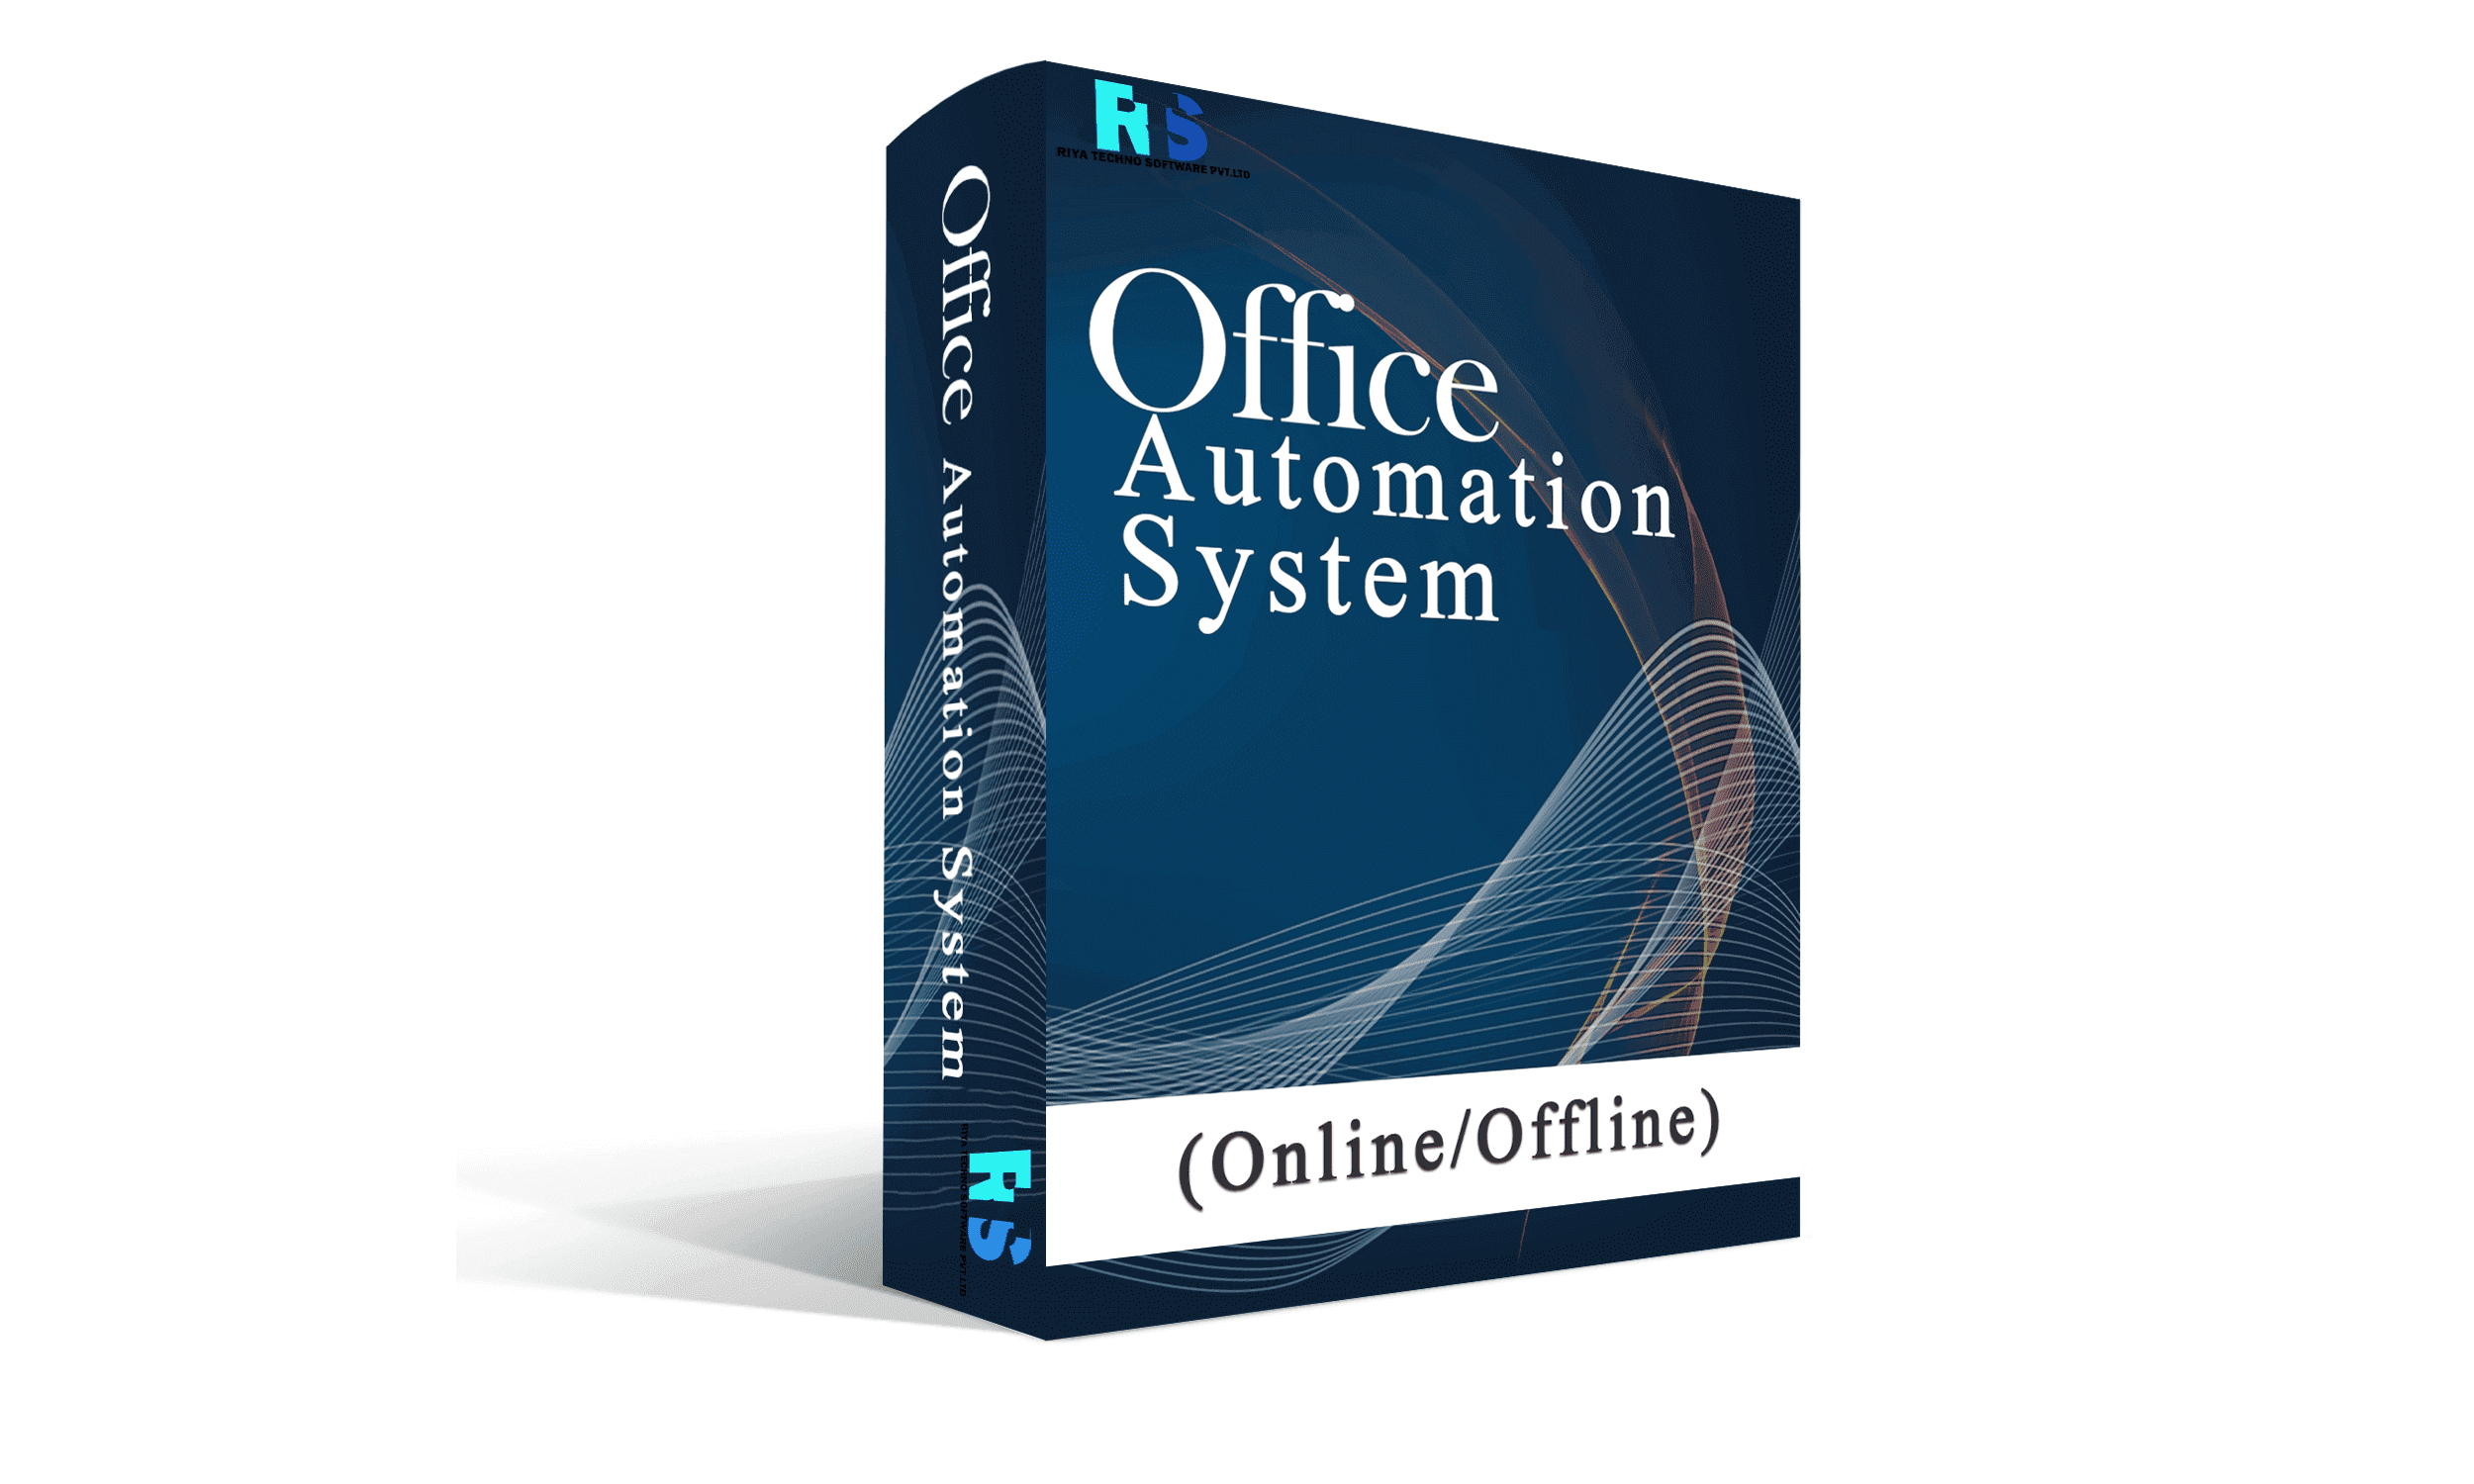 office automation software